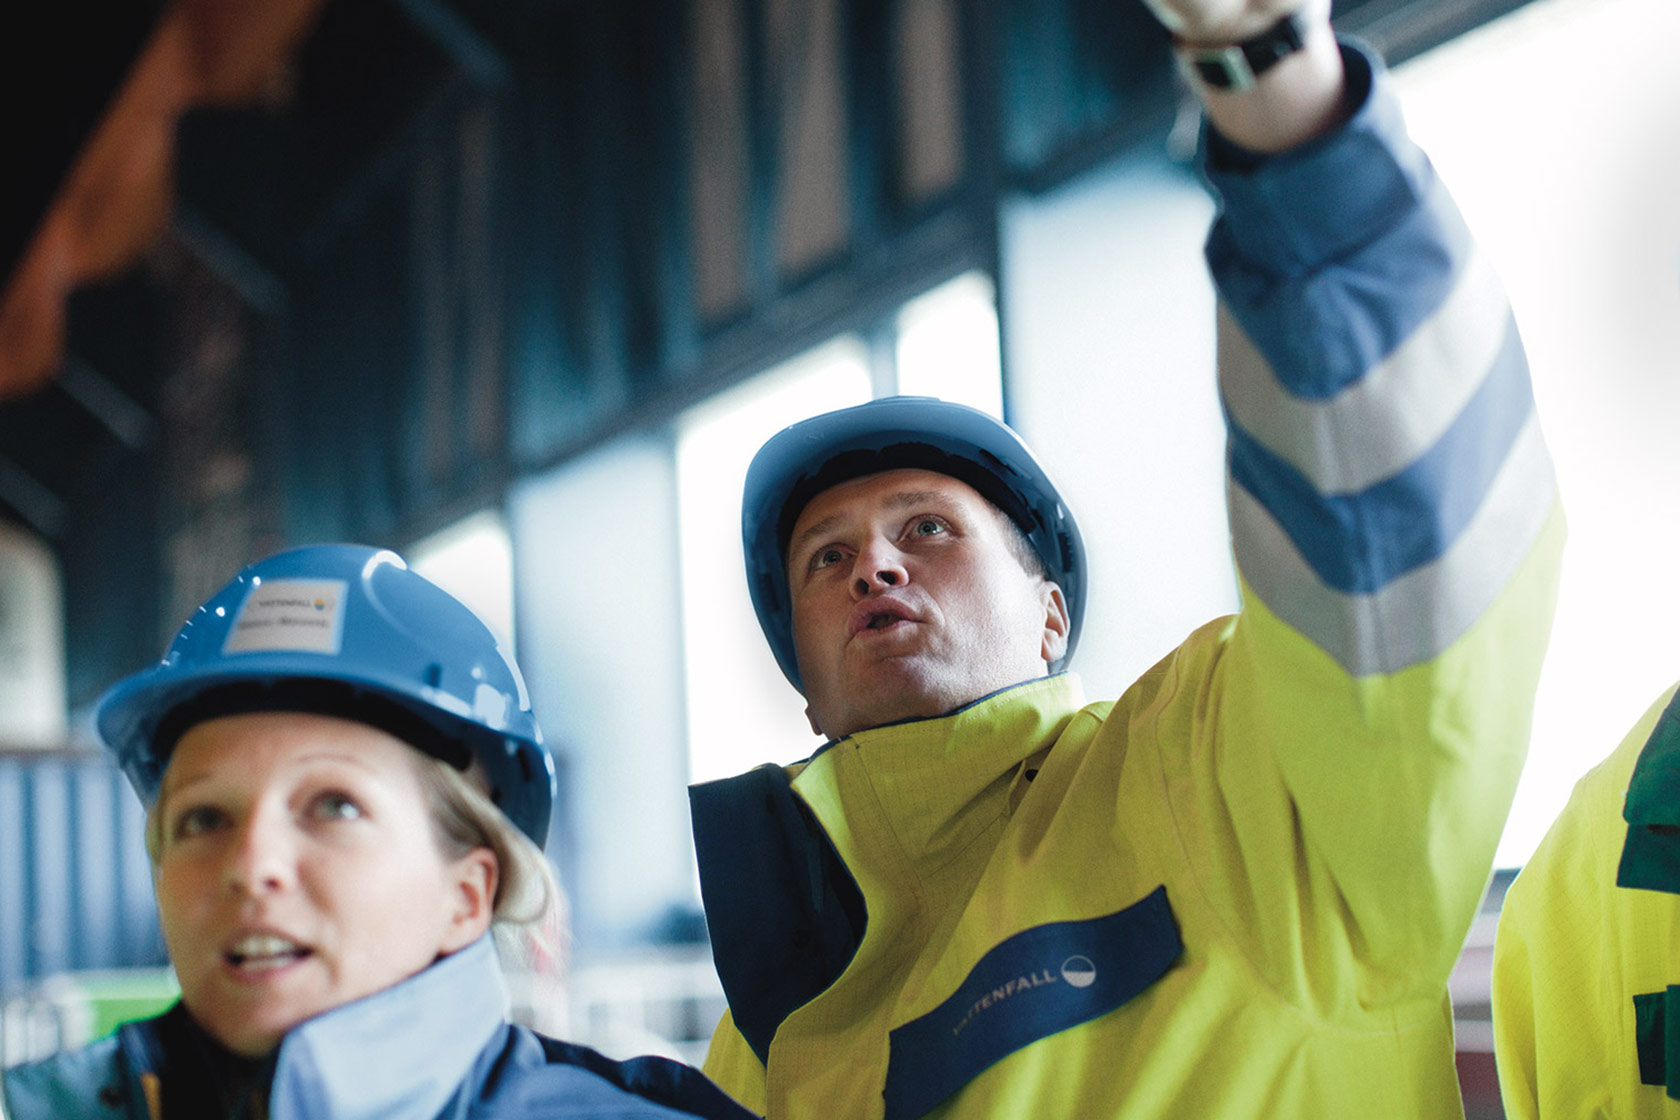 Two Vattenfall employees